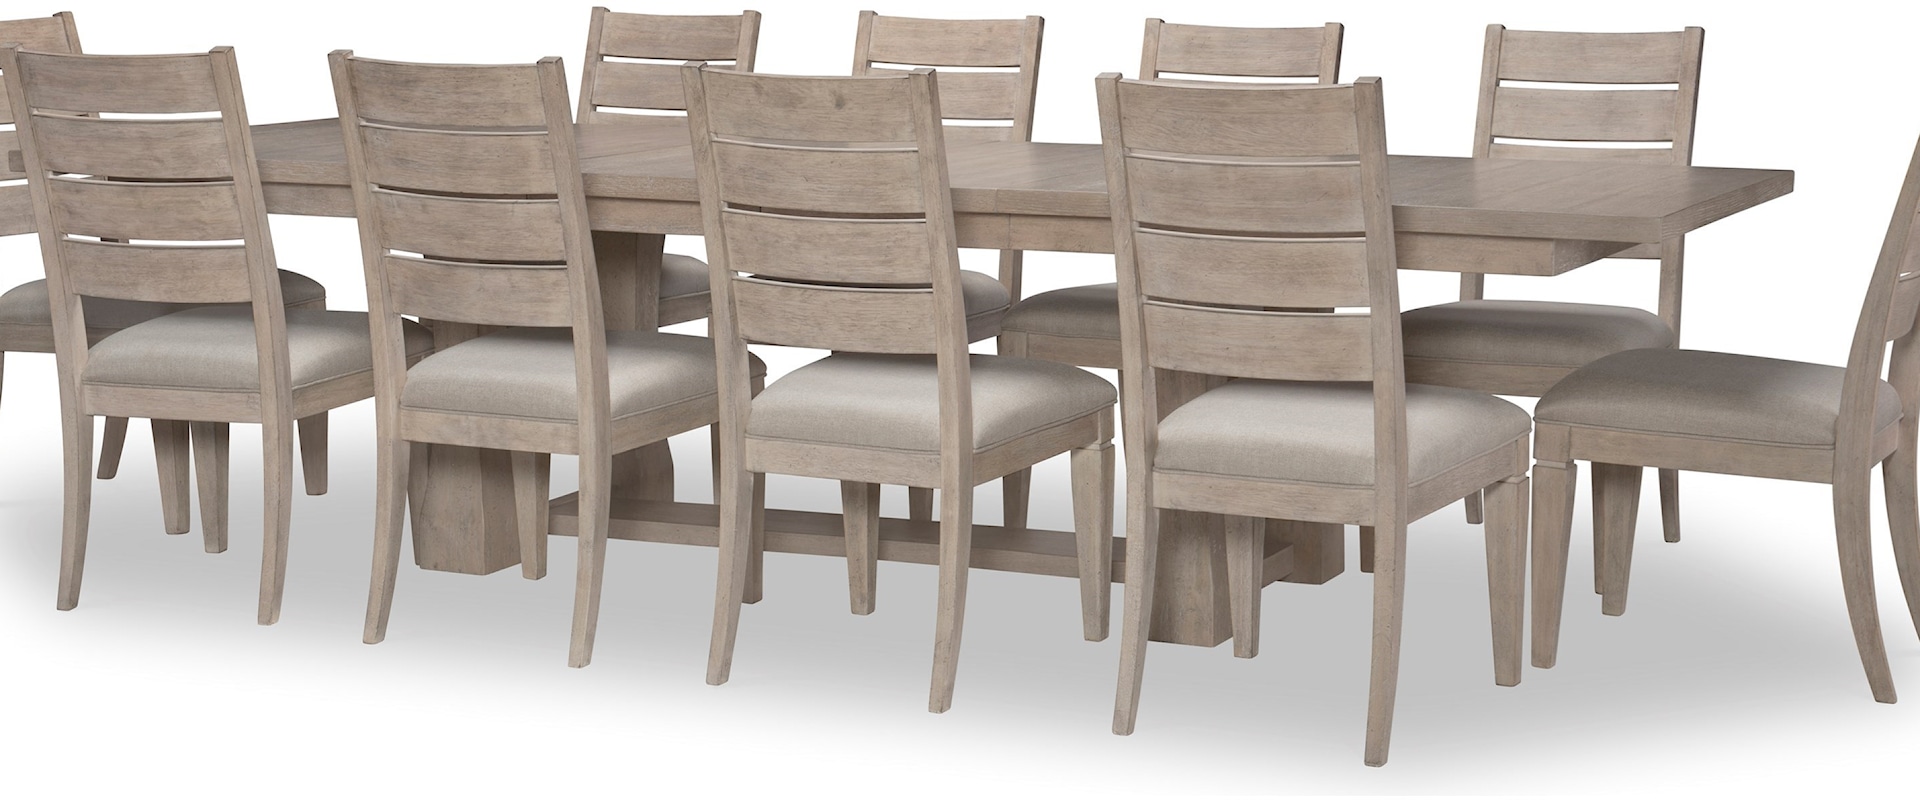 11-Piece Table and Chair Set